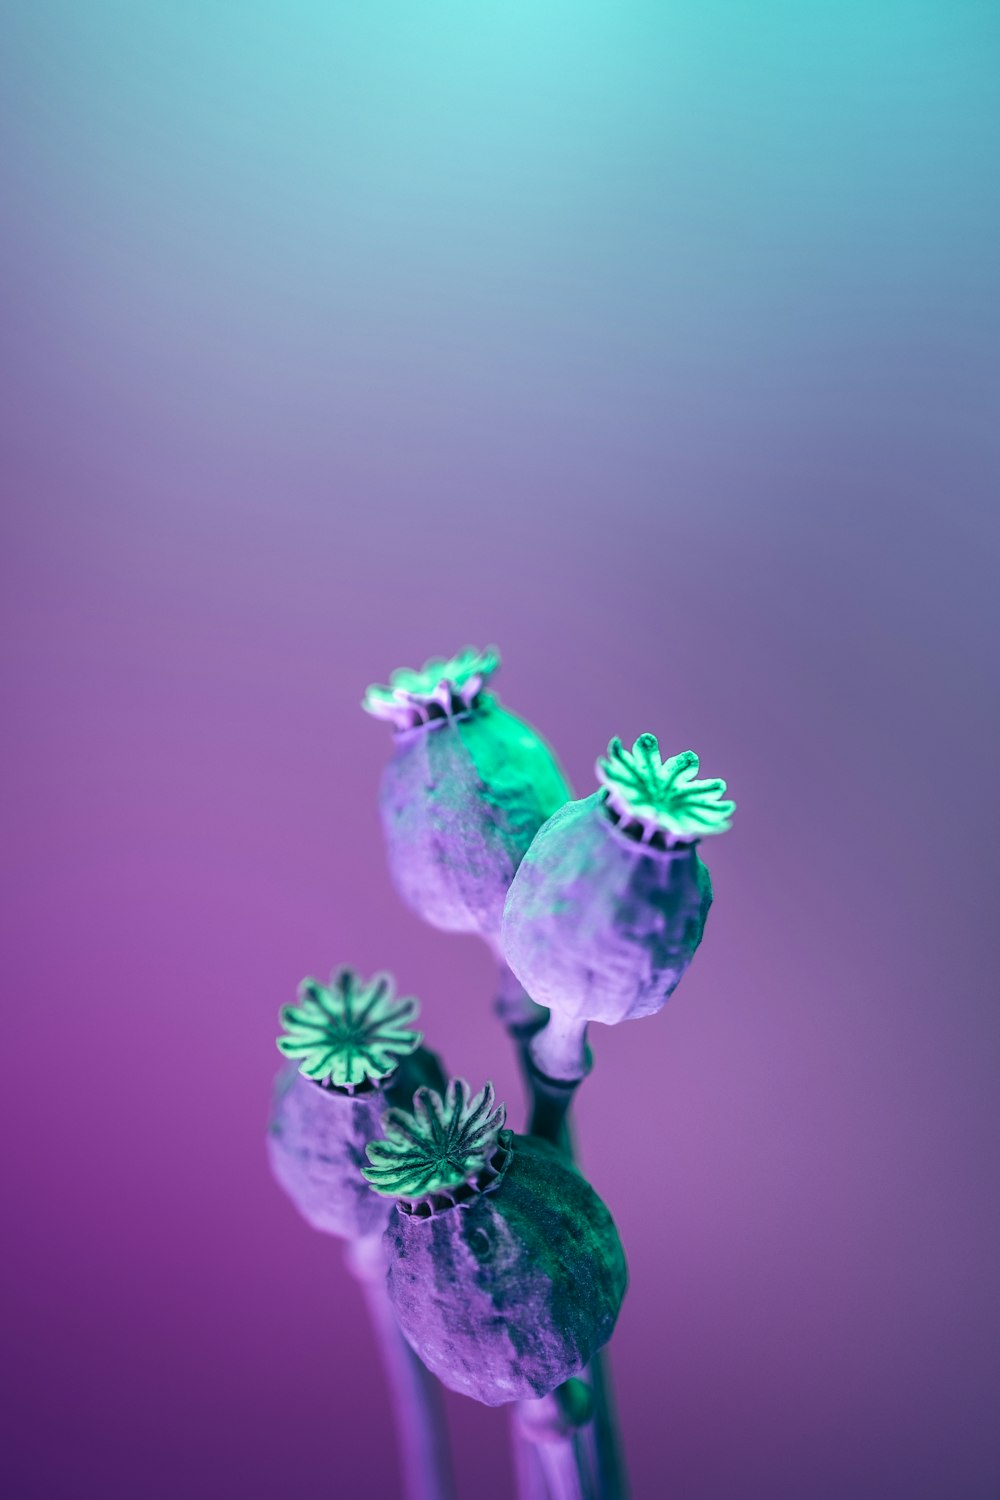 a close up of a flower on a purple and blue background